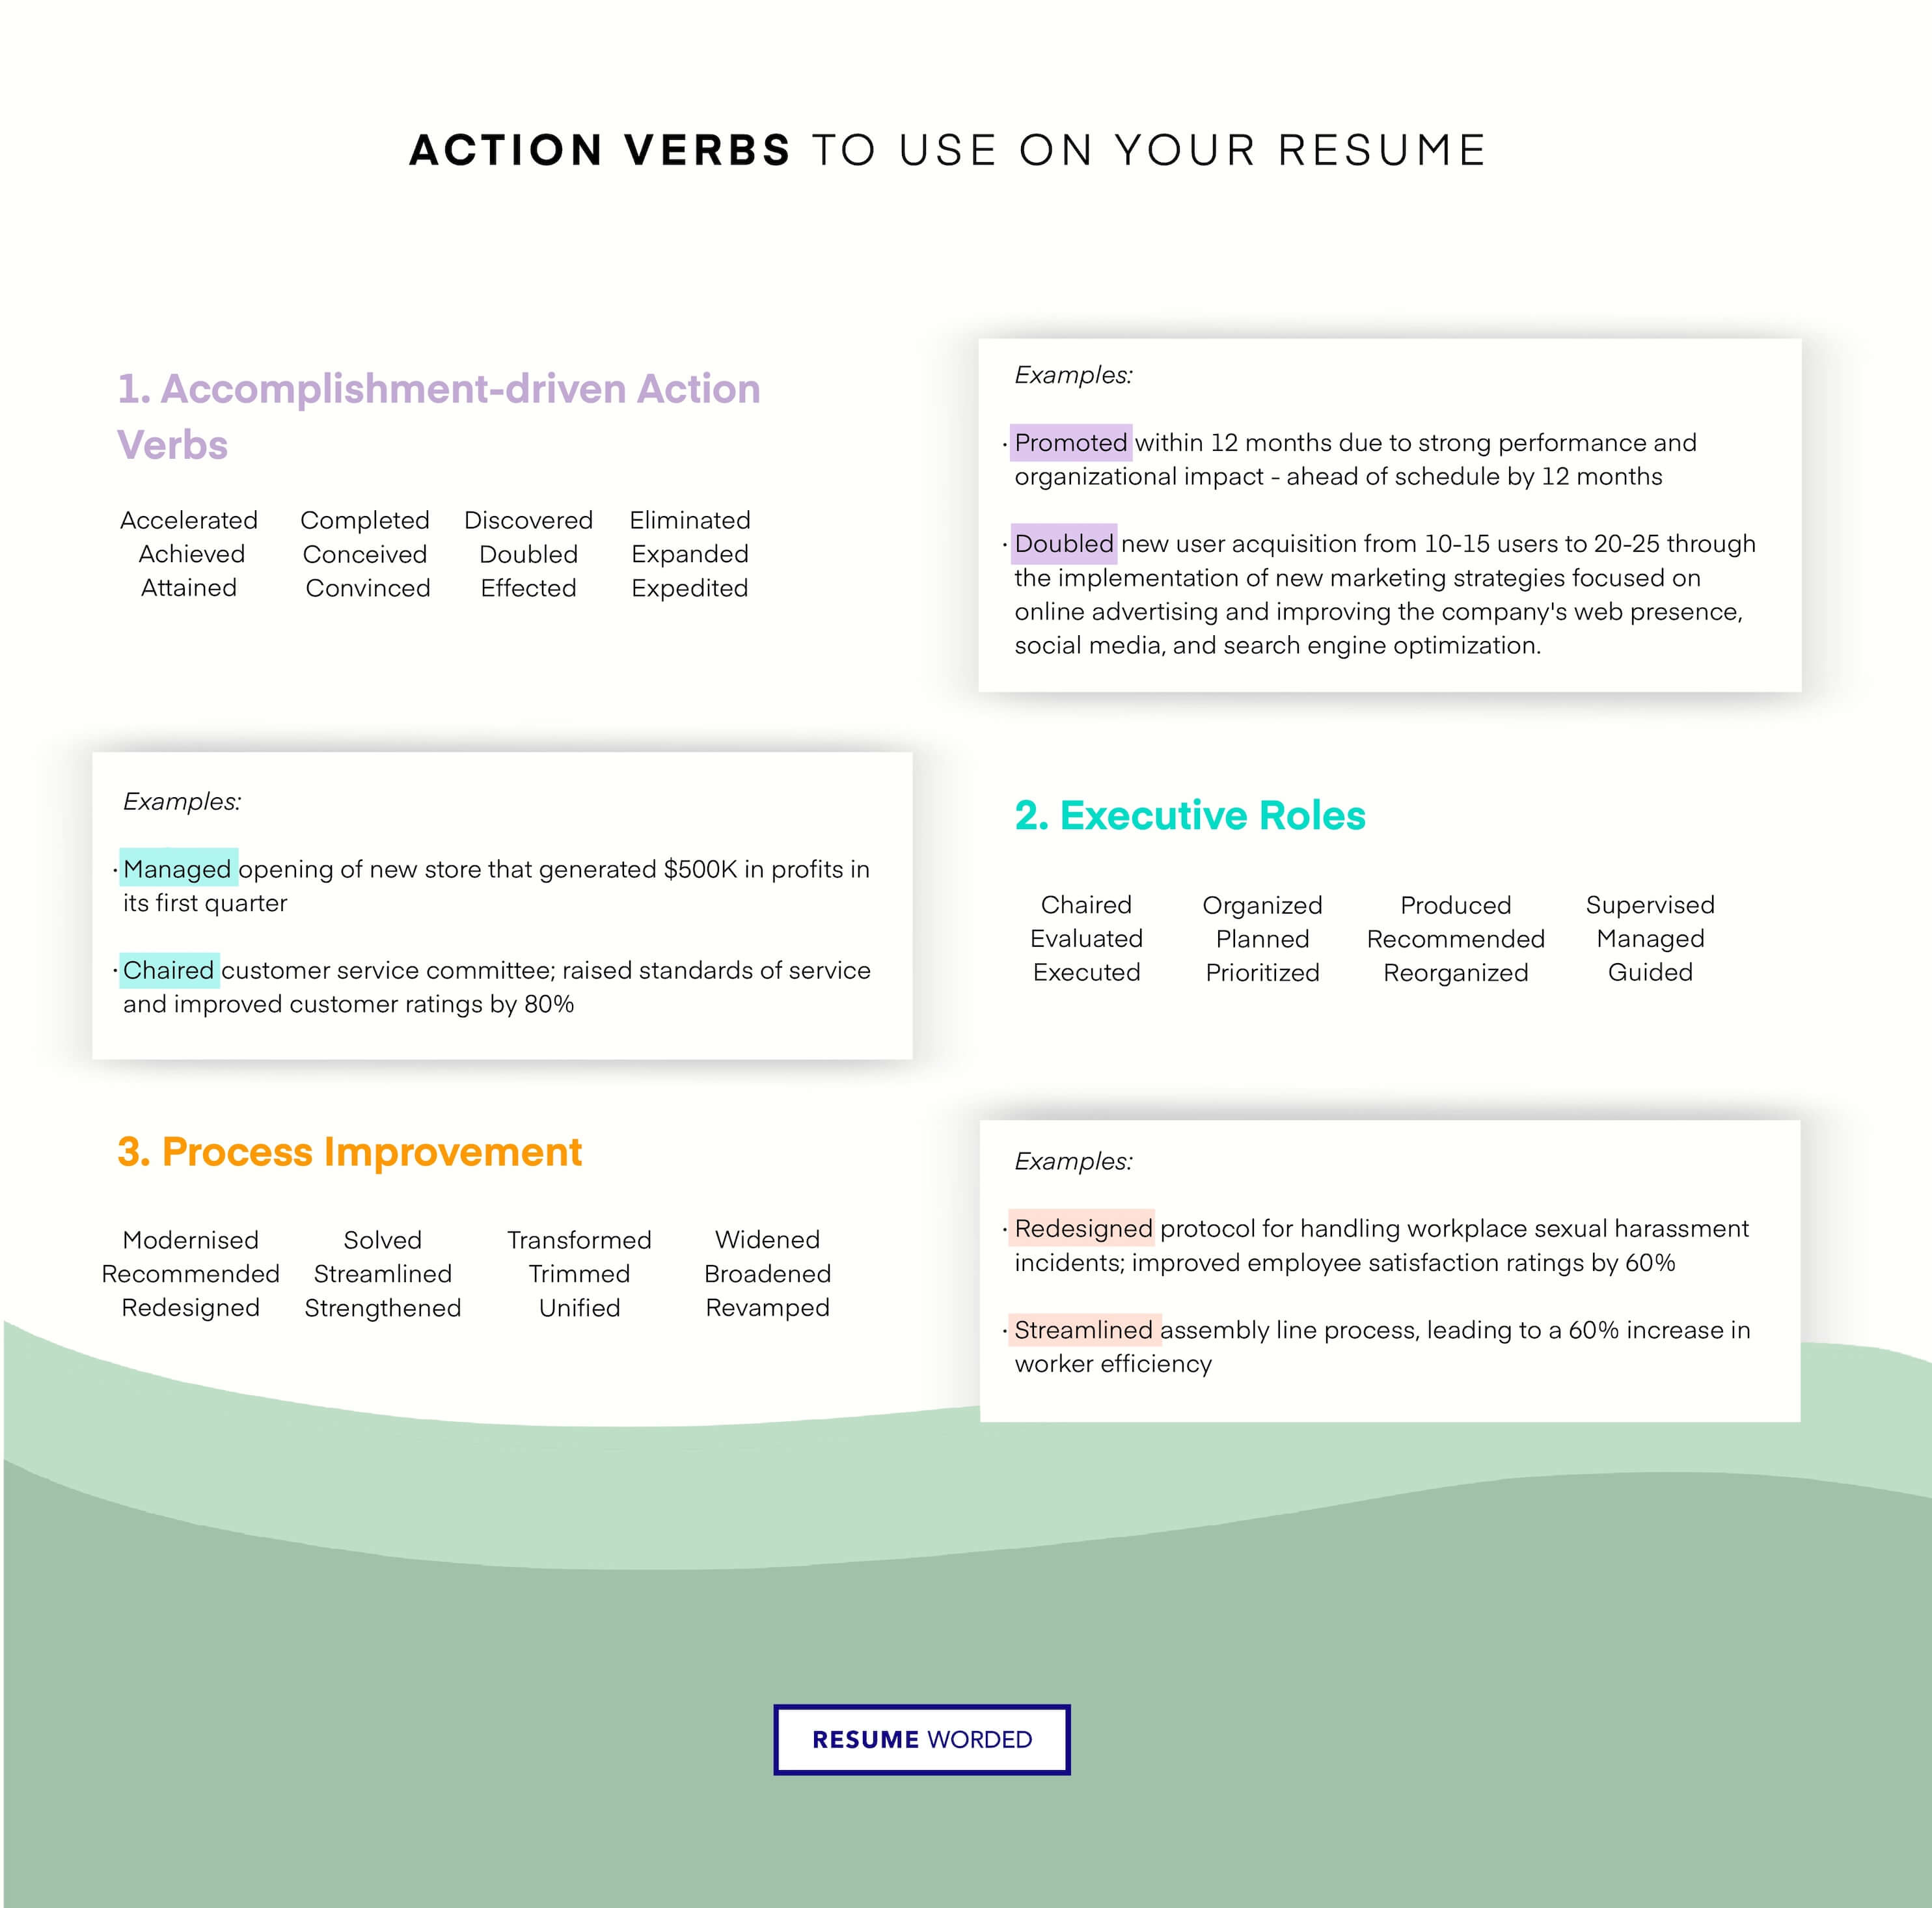 Use managerial action verbs. - Senior IT Manager Resume